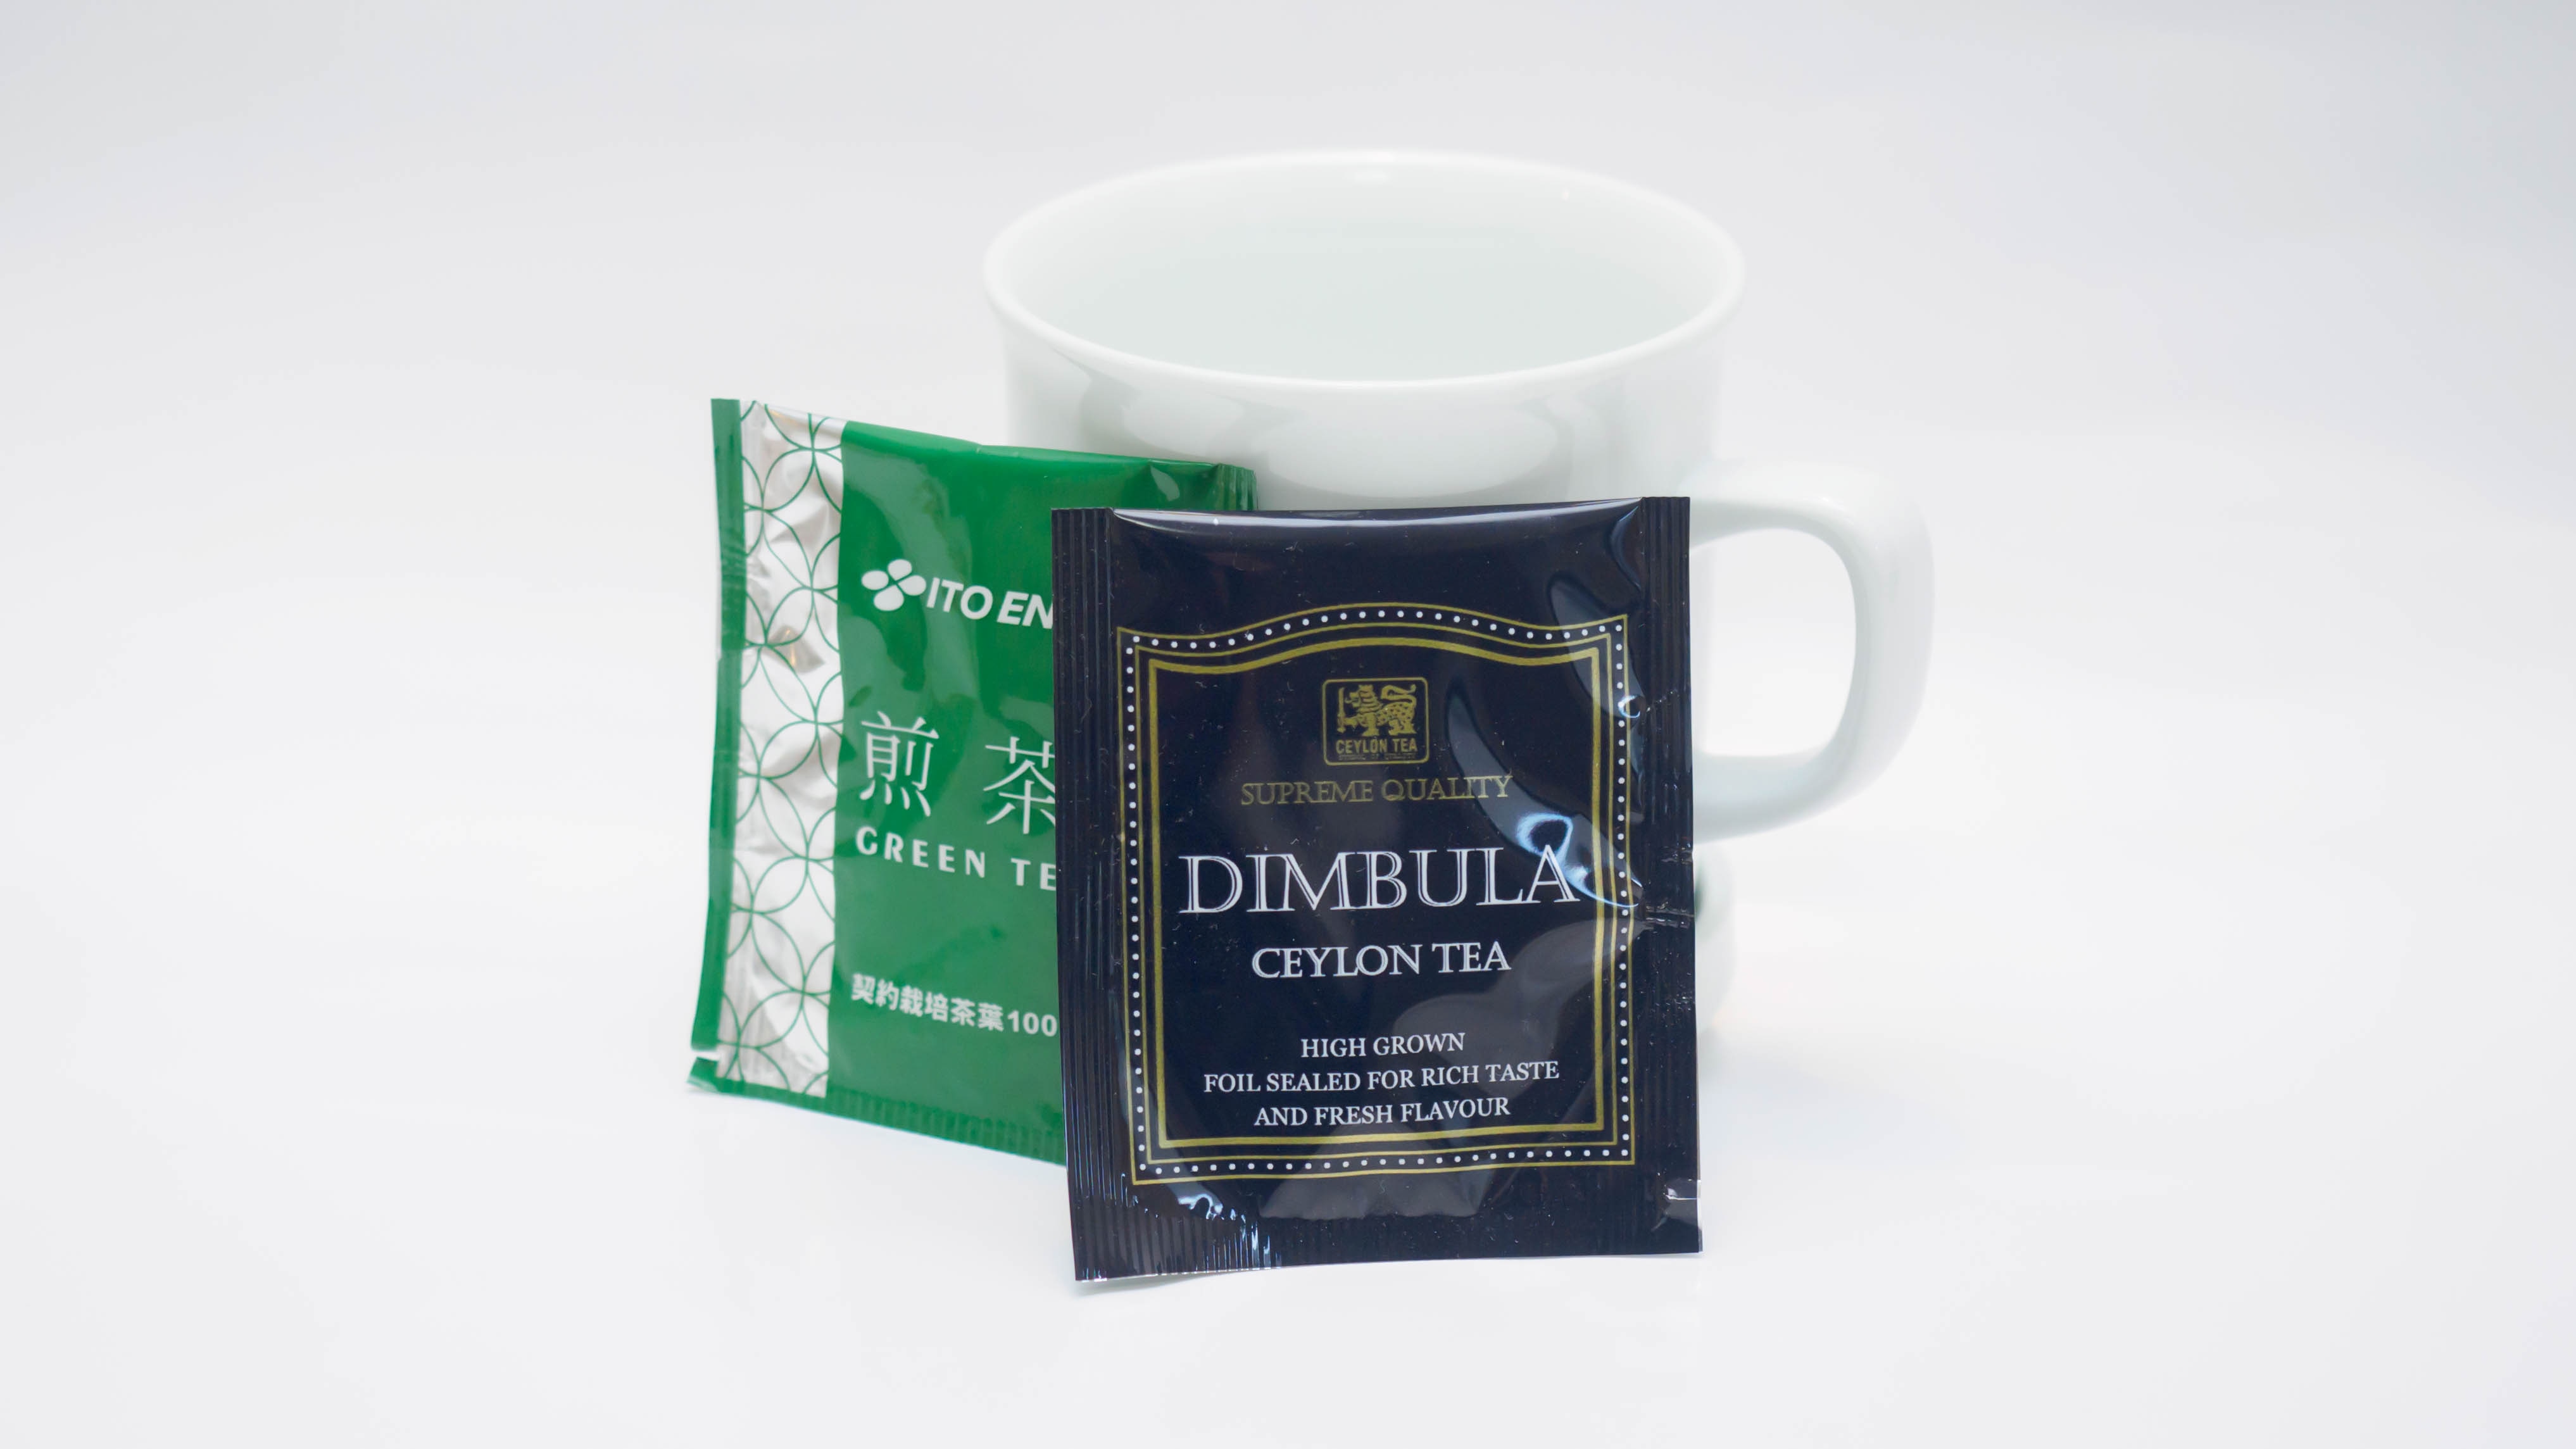 Sencha and black tea are available in the guest rooms.